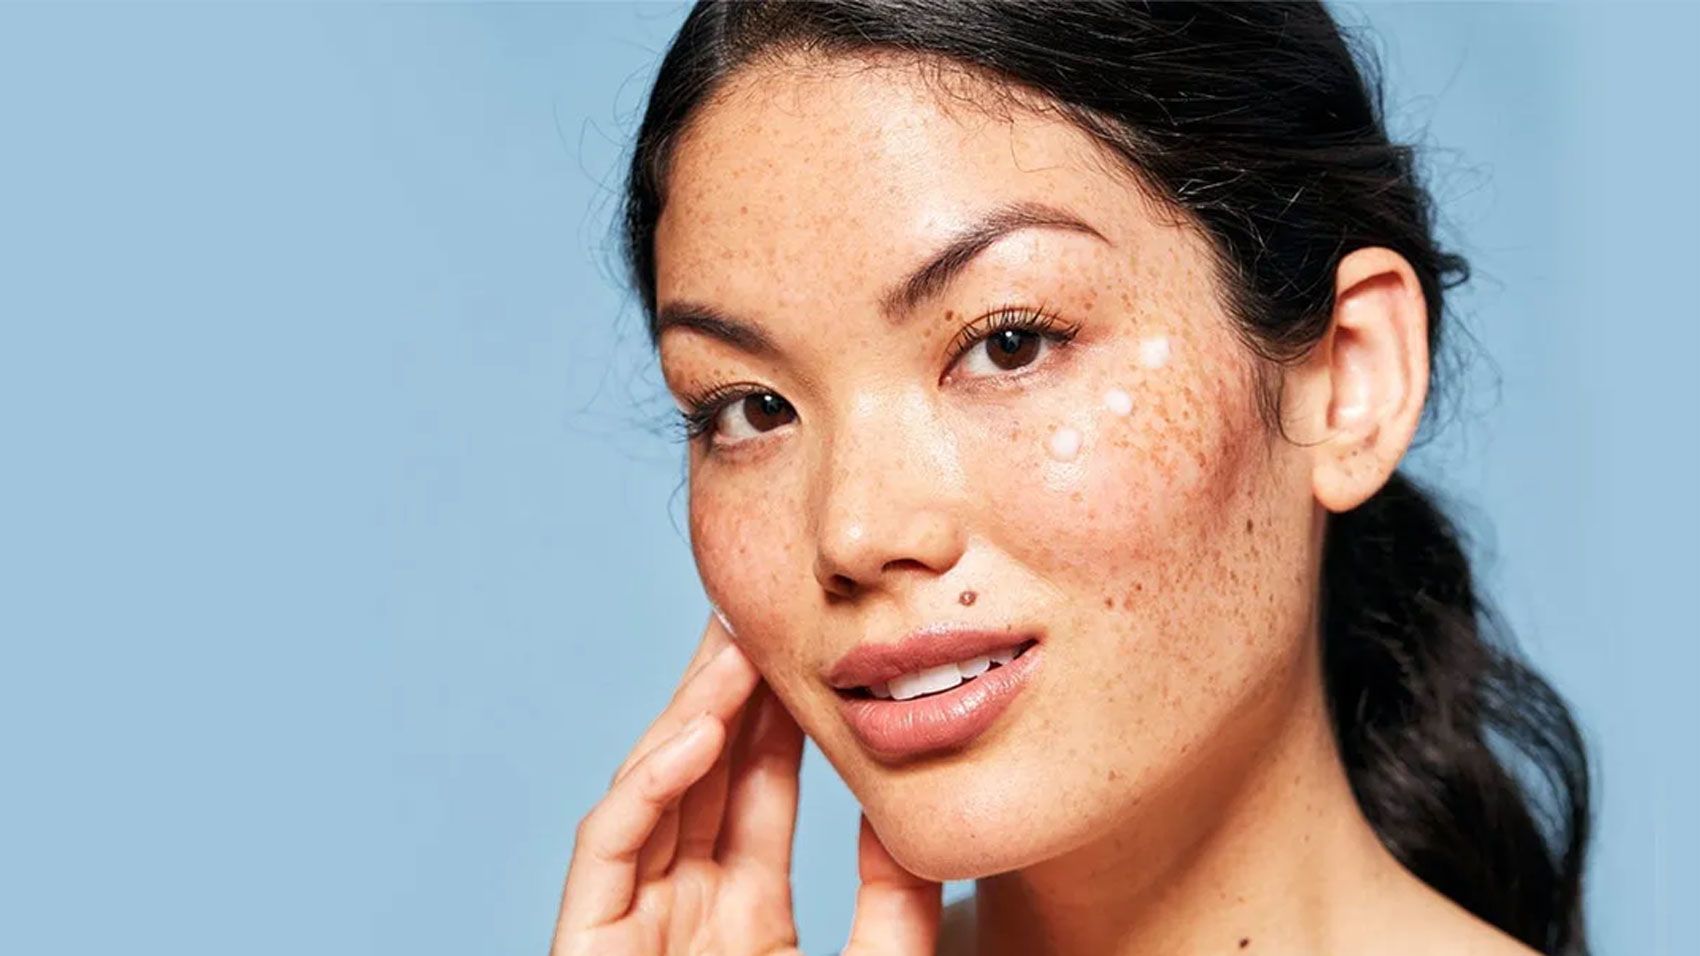 Skinimalism: The newest beauty trend for simple skin care explained